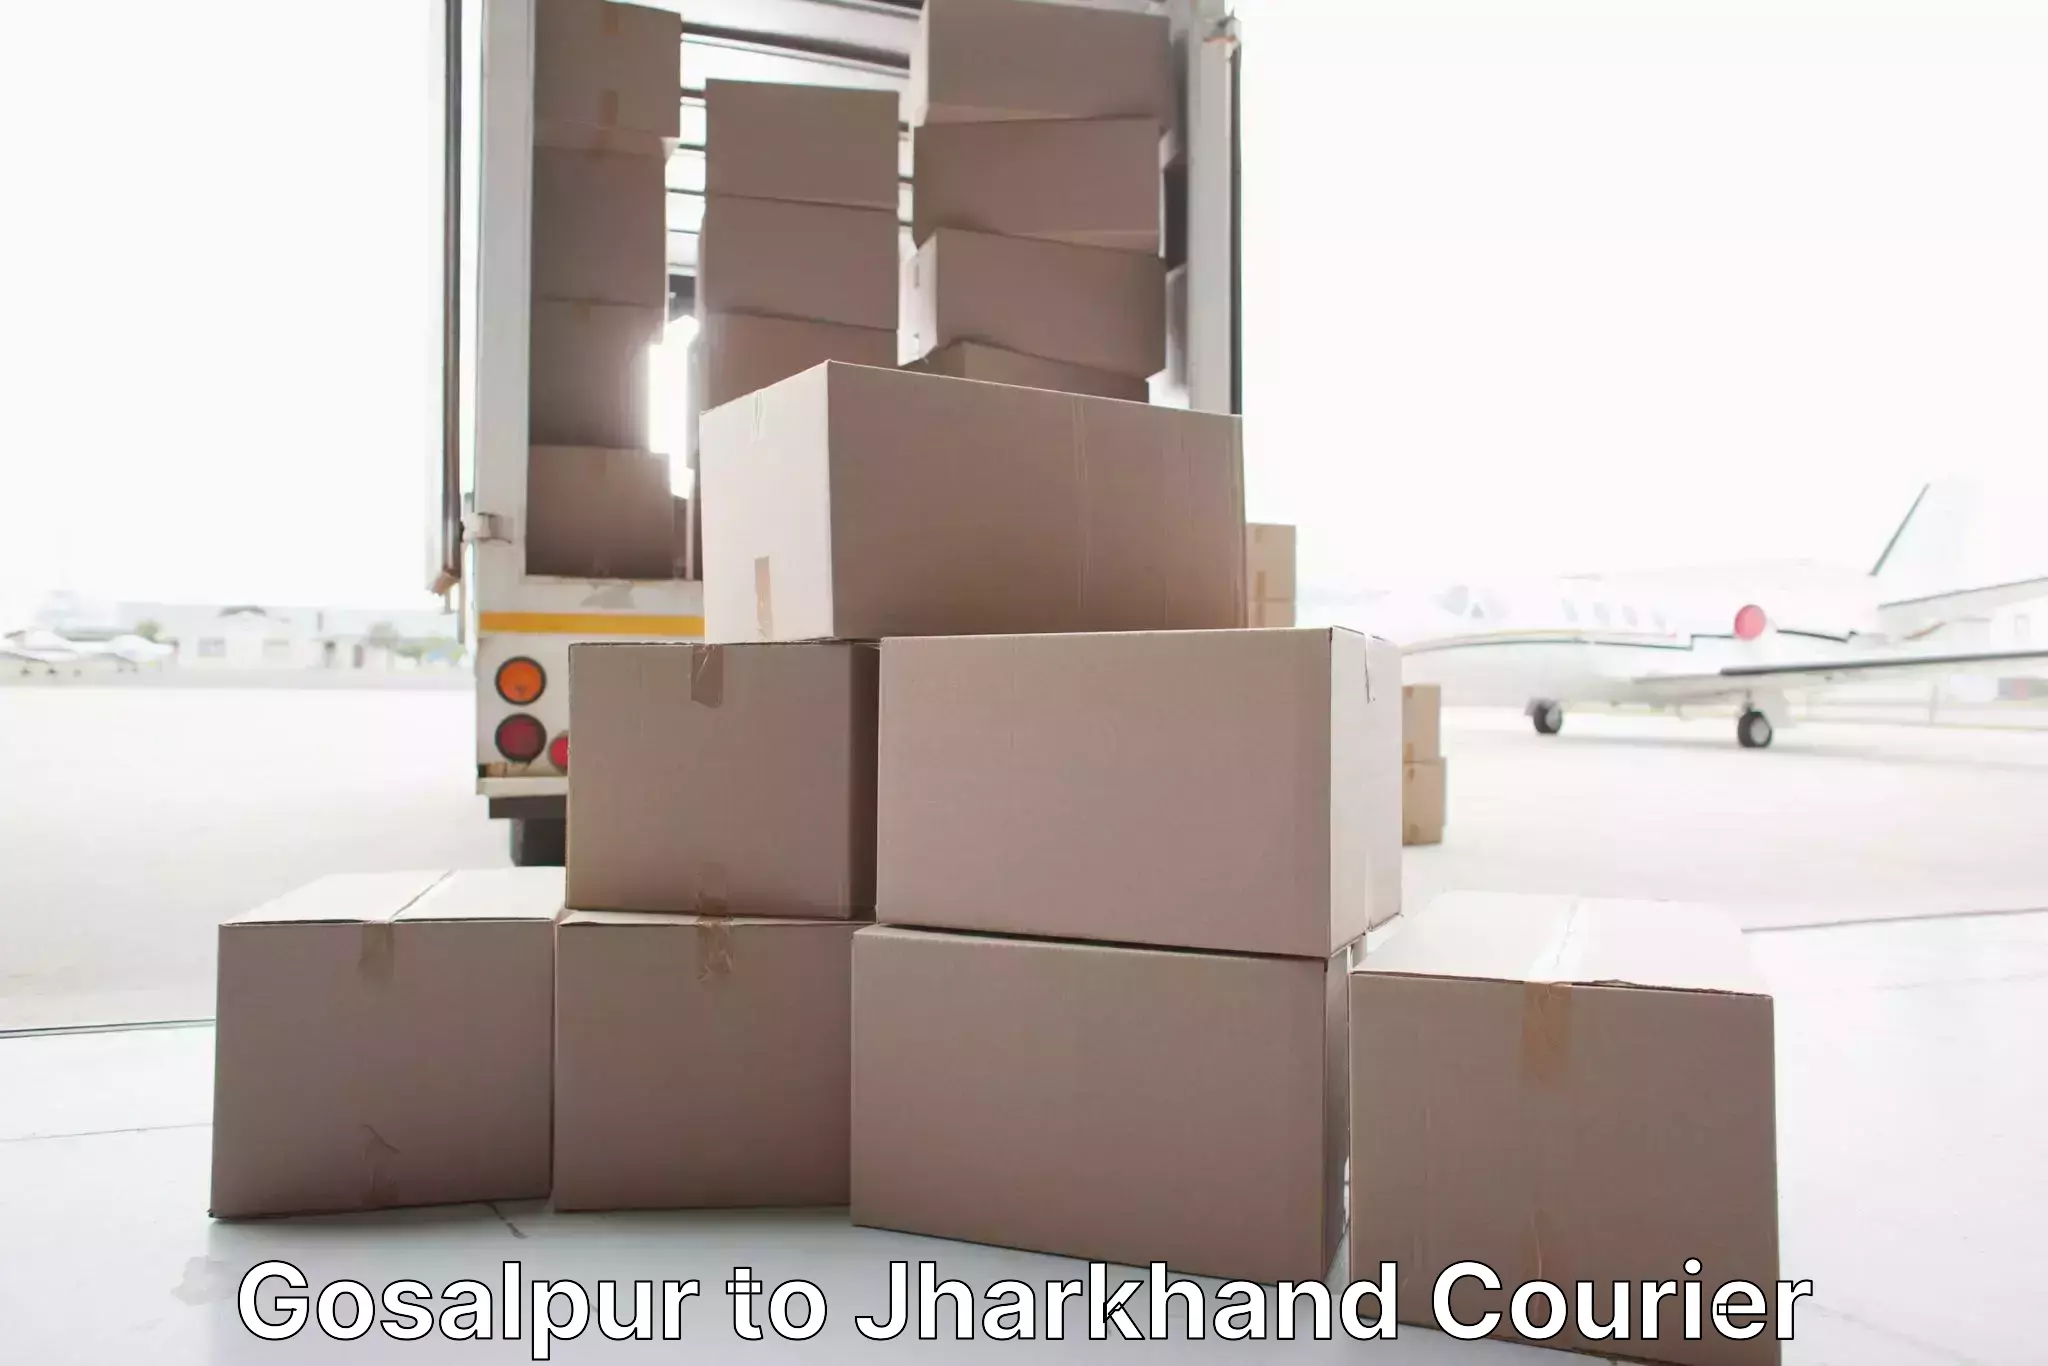 Professional movers Gosalpur to Jharkhand